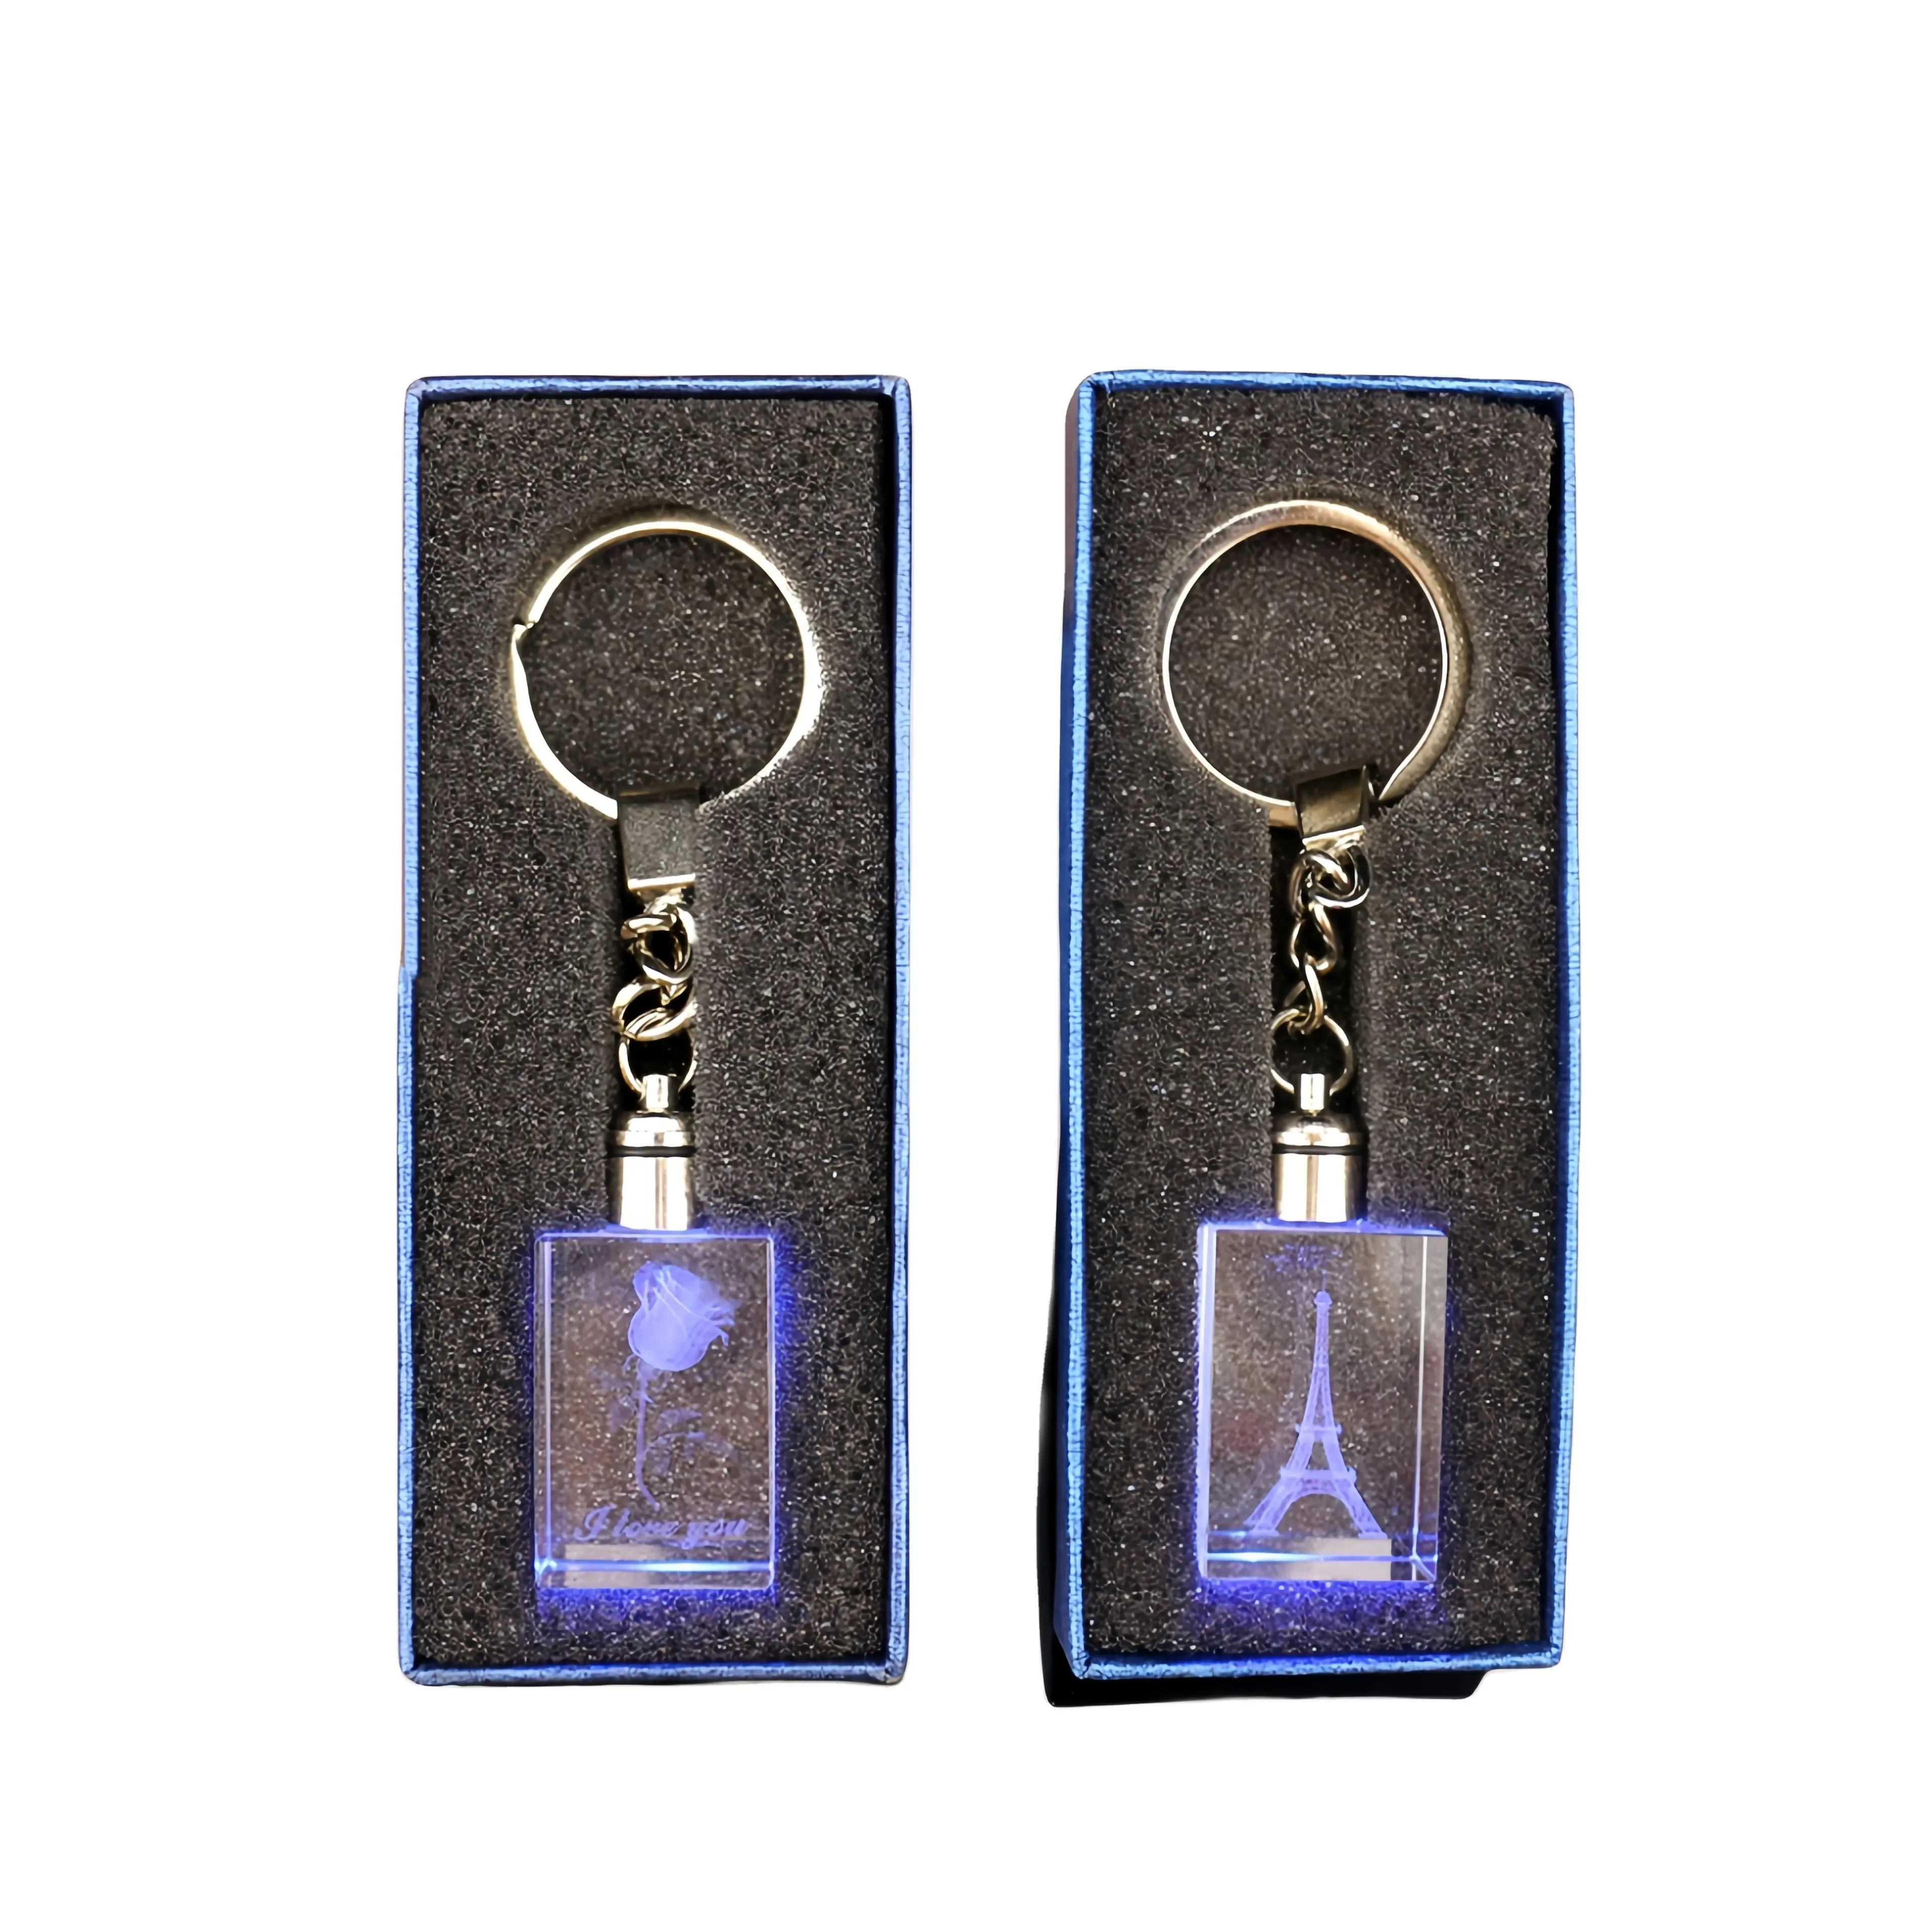 Fancy Cheap Customized Design Engraved Crystal Key Chain Handmade Colorful 3D Laser Engraved Crystal Keychain Fashion Key Ring